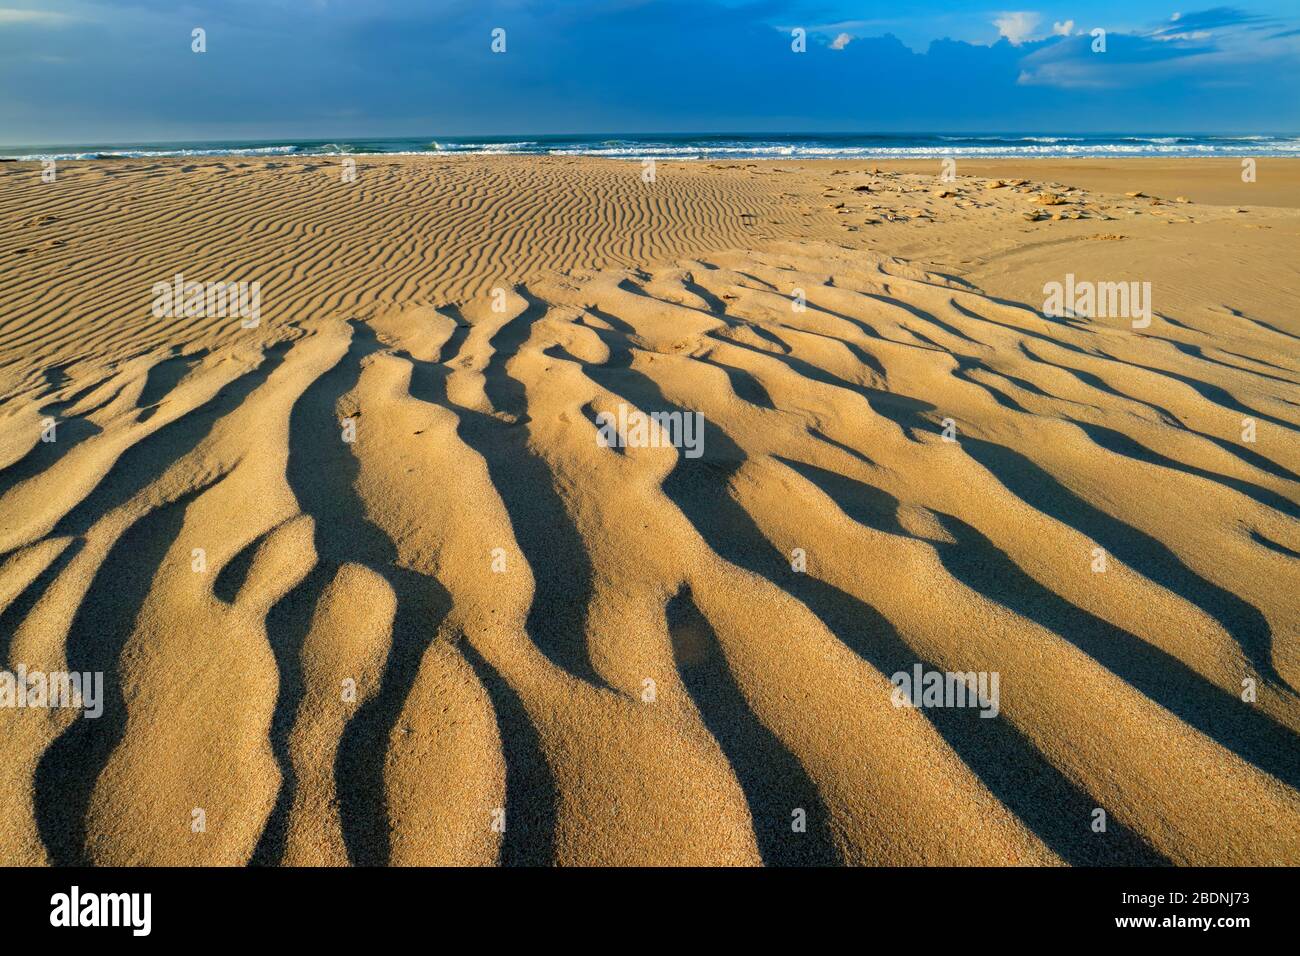 Scenic beach early morning with wind-blown patterns in the sand, South Africa Stock Photo